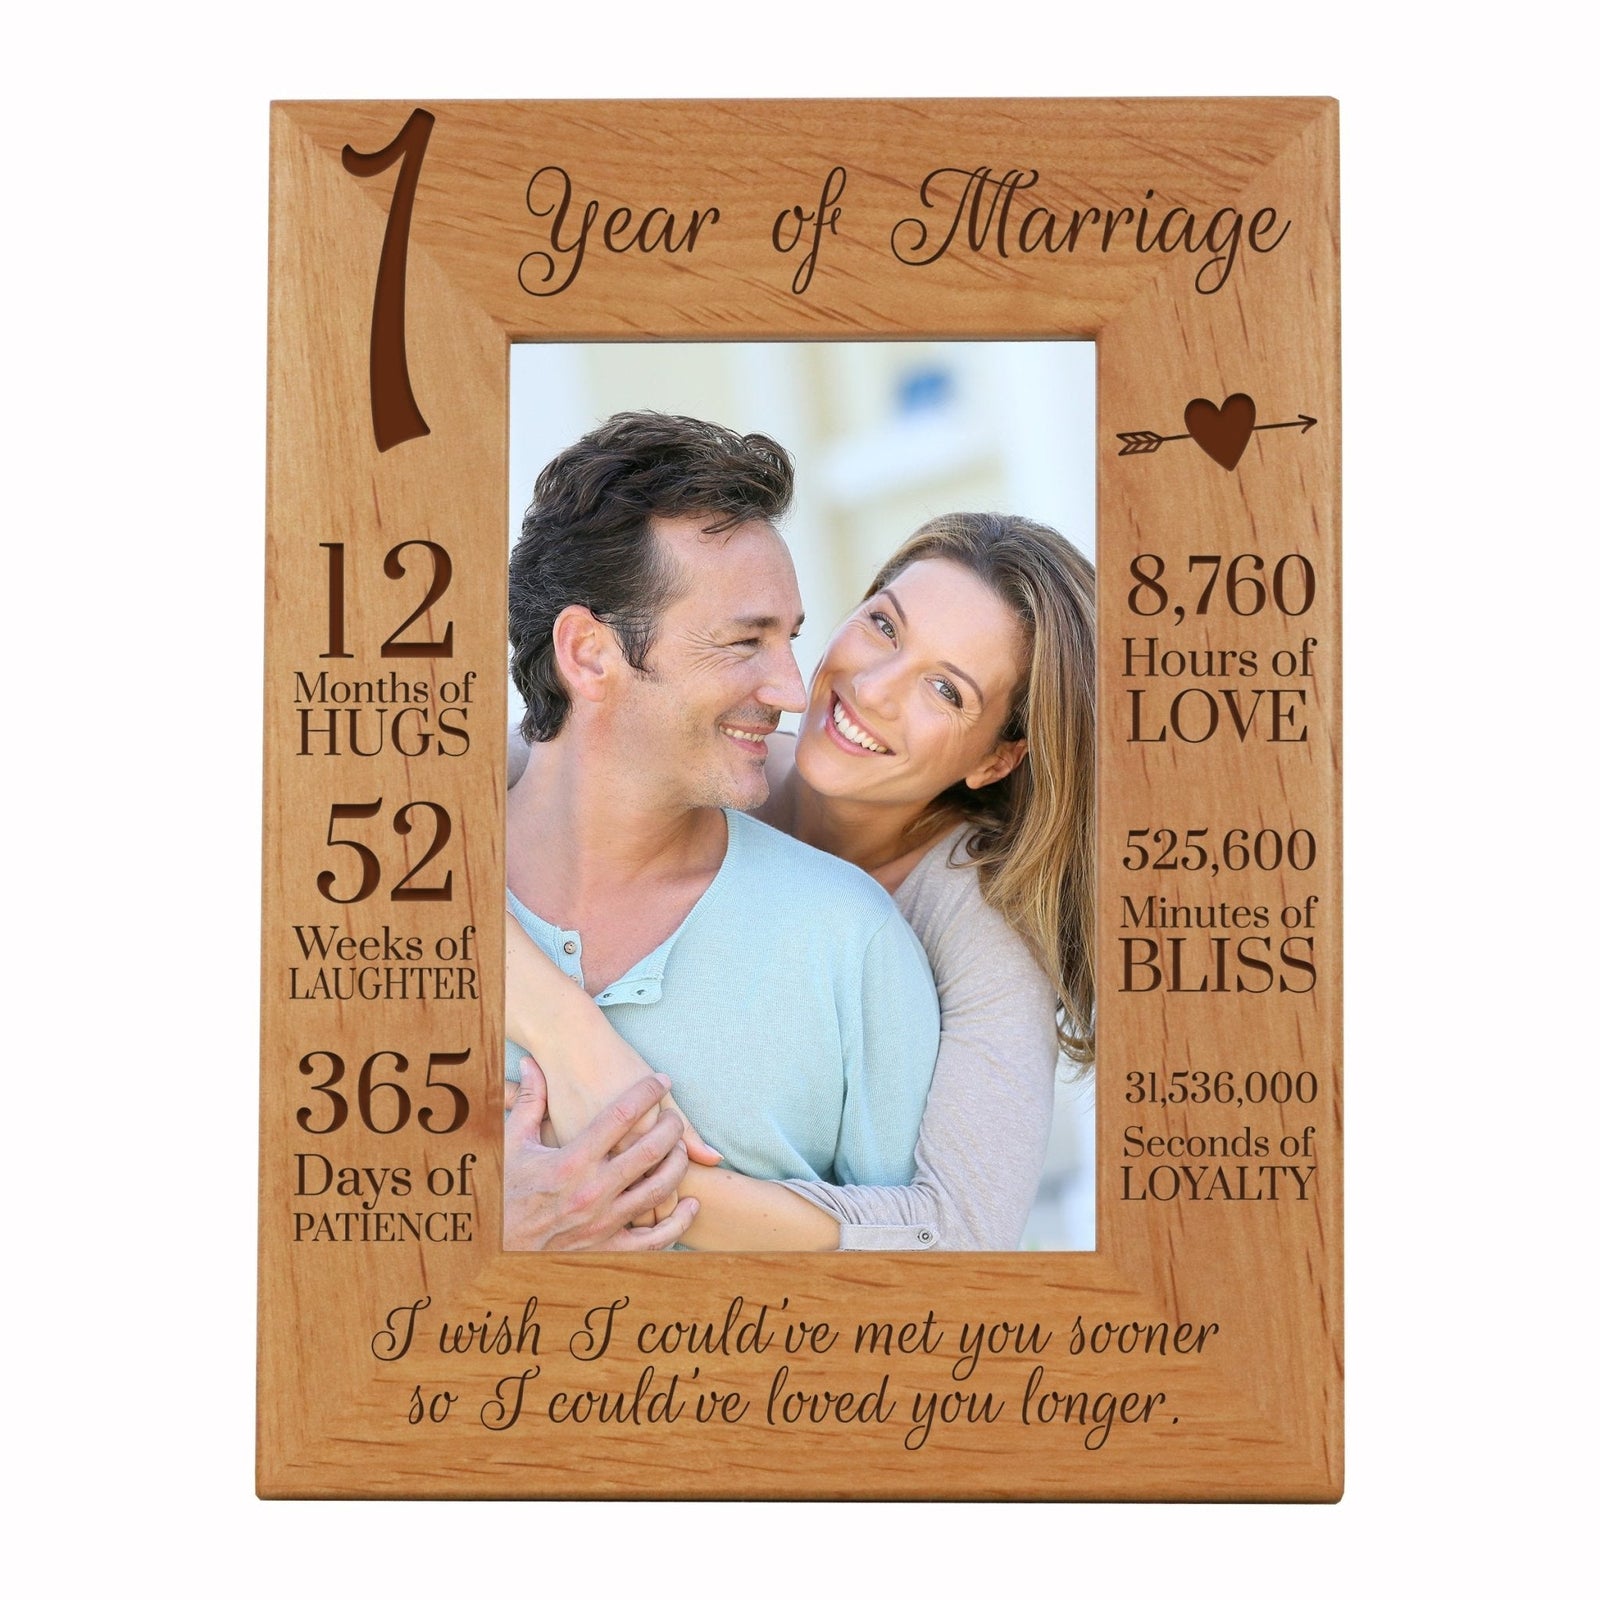 Engraved 1st Wedding Anniversary Photo Frame Wall Decor Gift for Couples - Met You Sooner - LifeSong Milestones